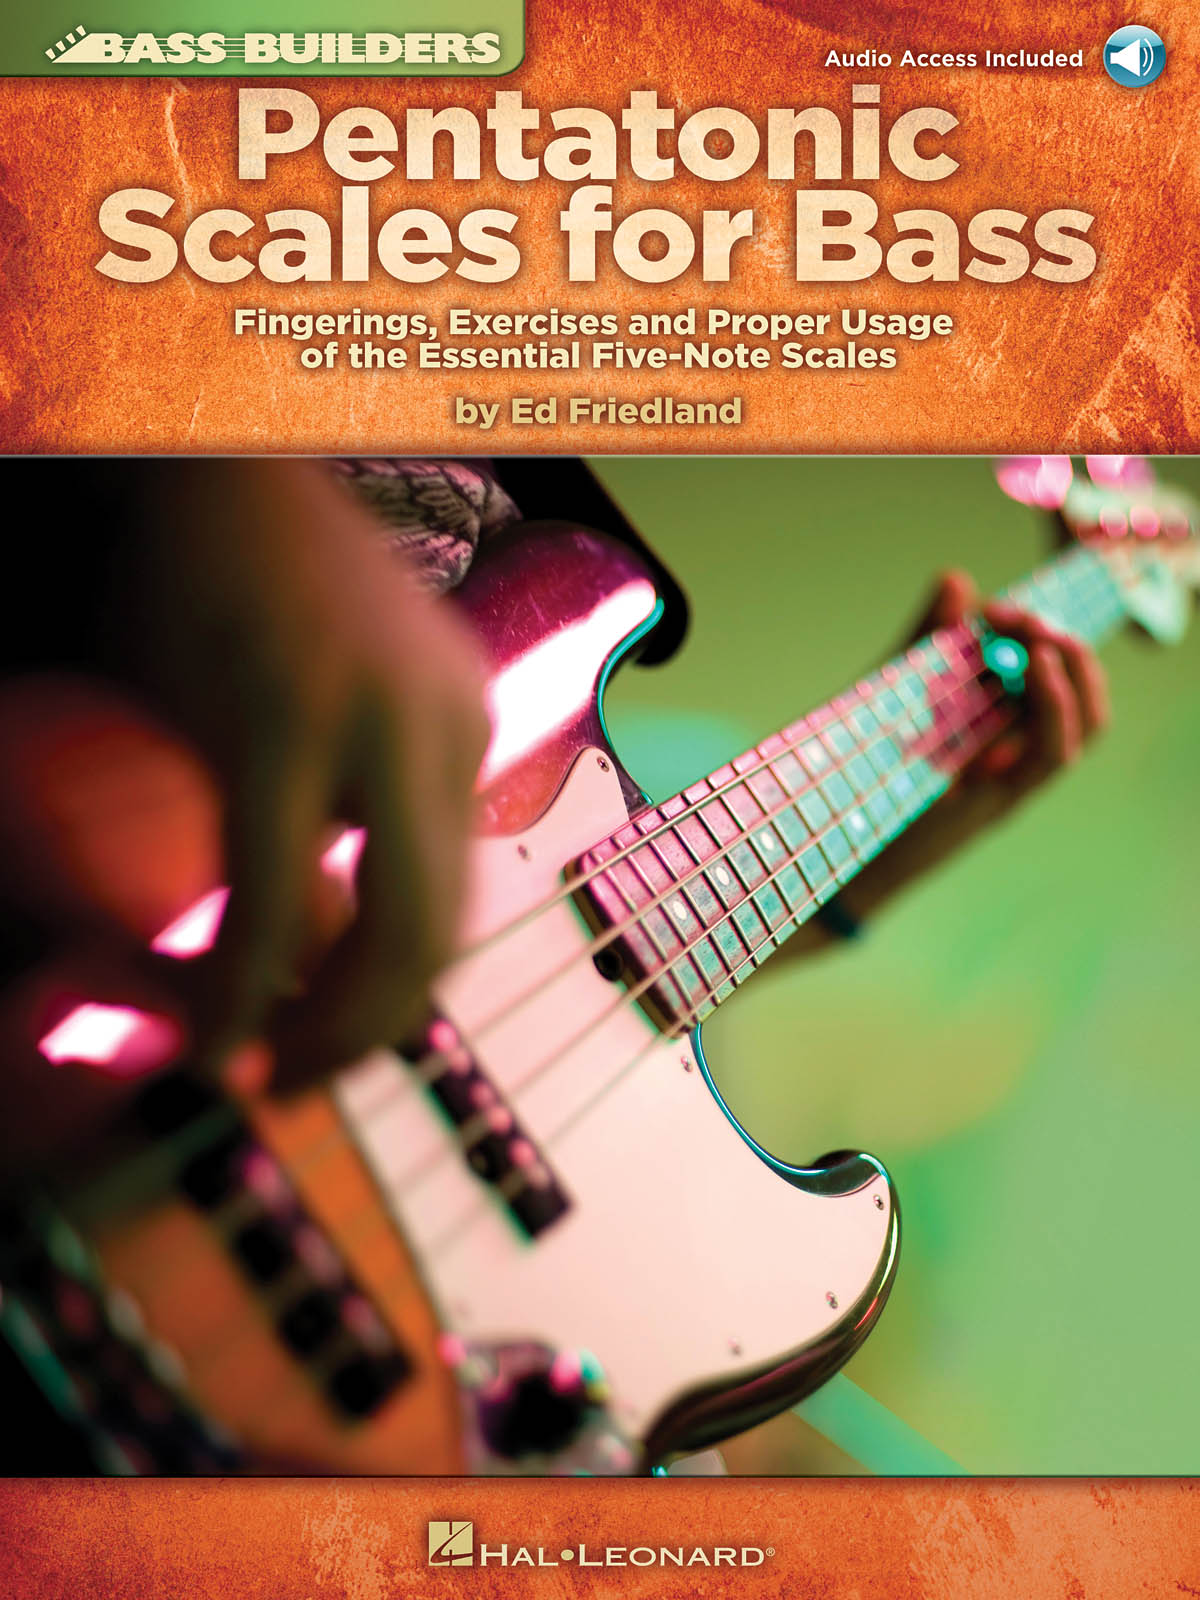 Pentatonic Scales for Bass - Fingerings, Exercises and Proper Usage of the Essential Five-Note Scales - noty pro basovou kytaru